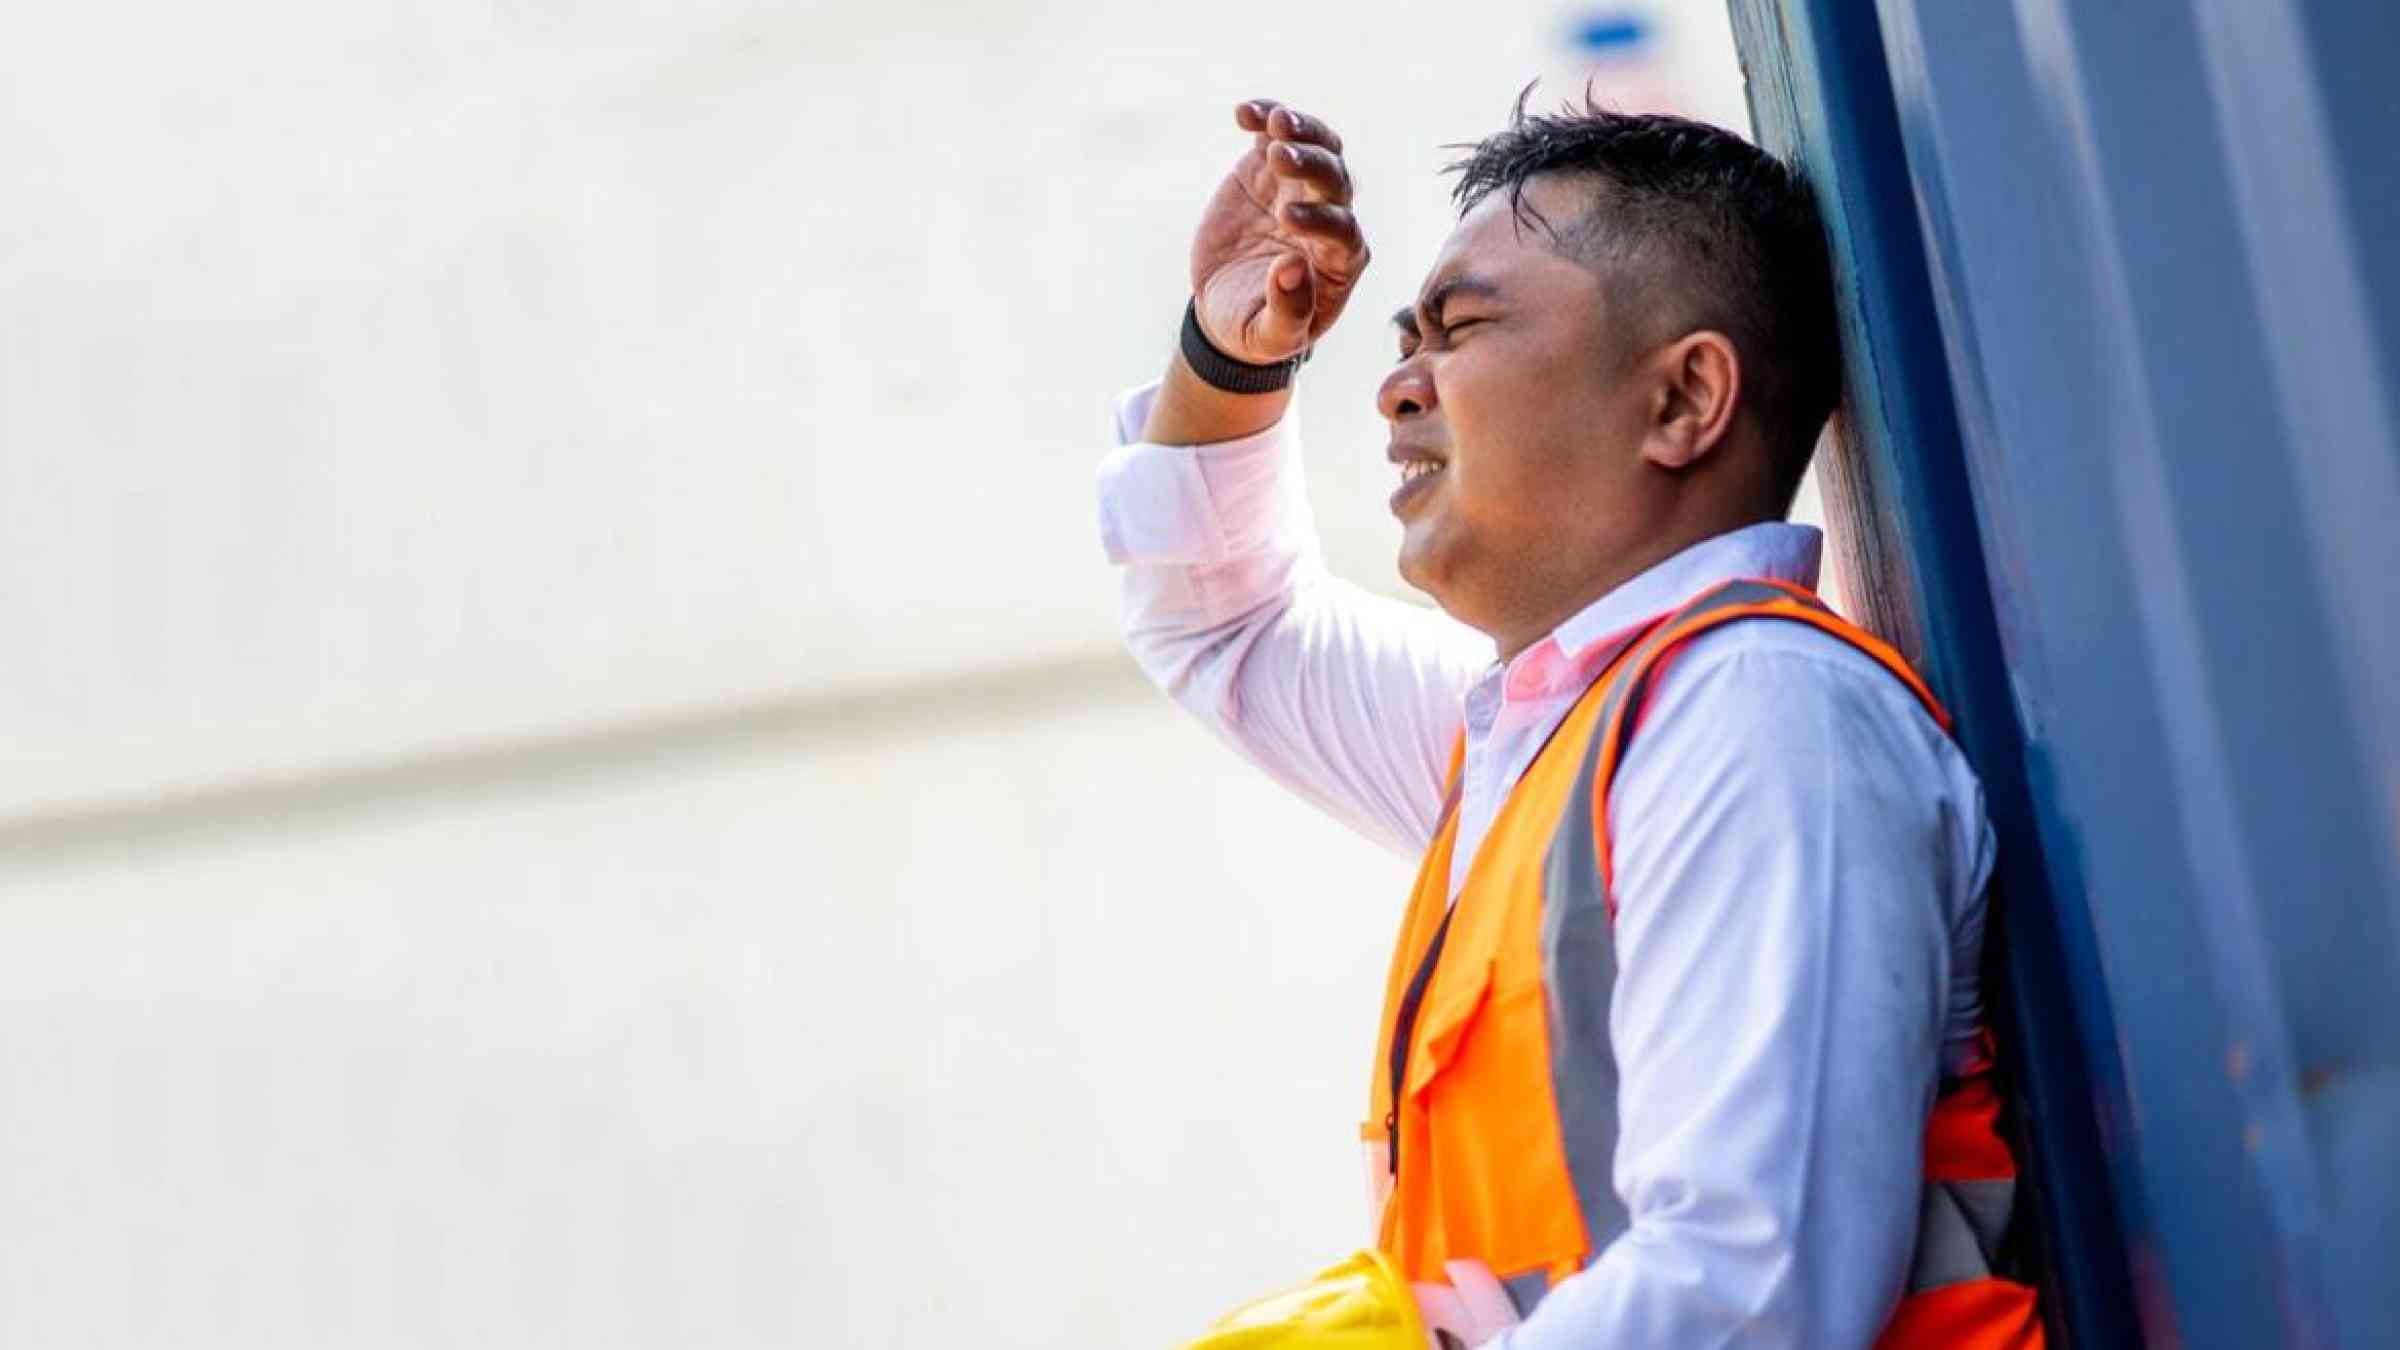 A man in a reflective vest takes a break amidst hot weather